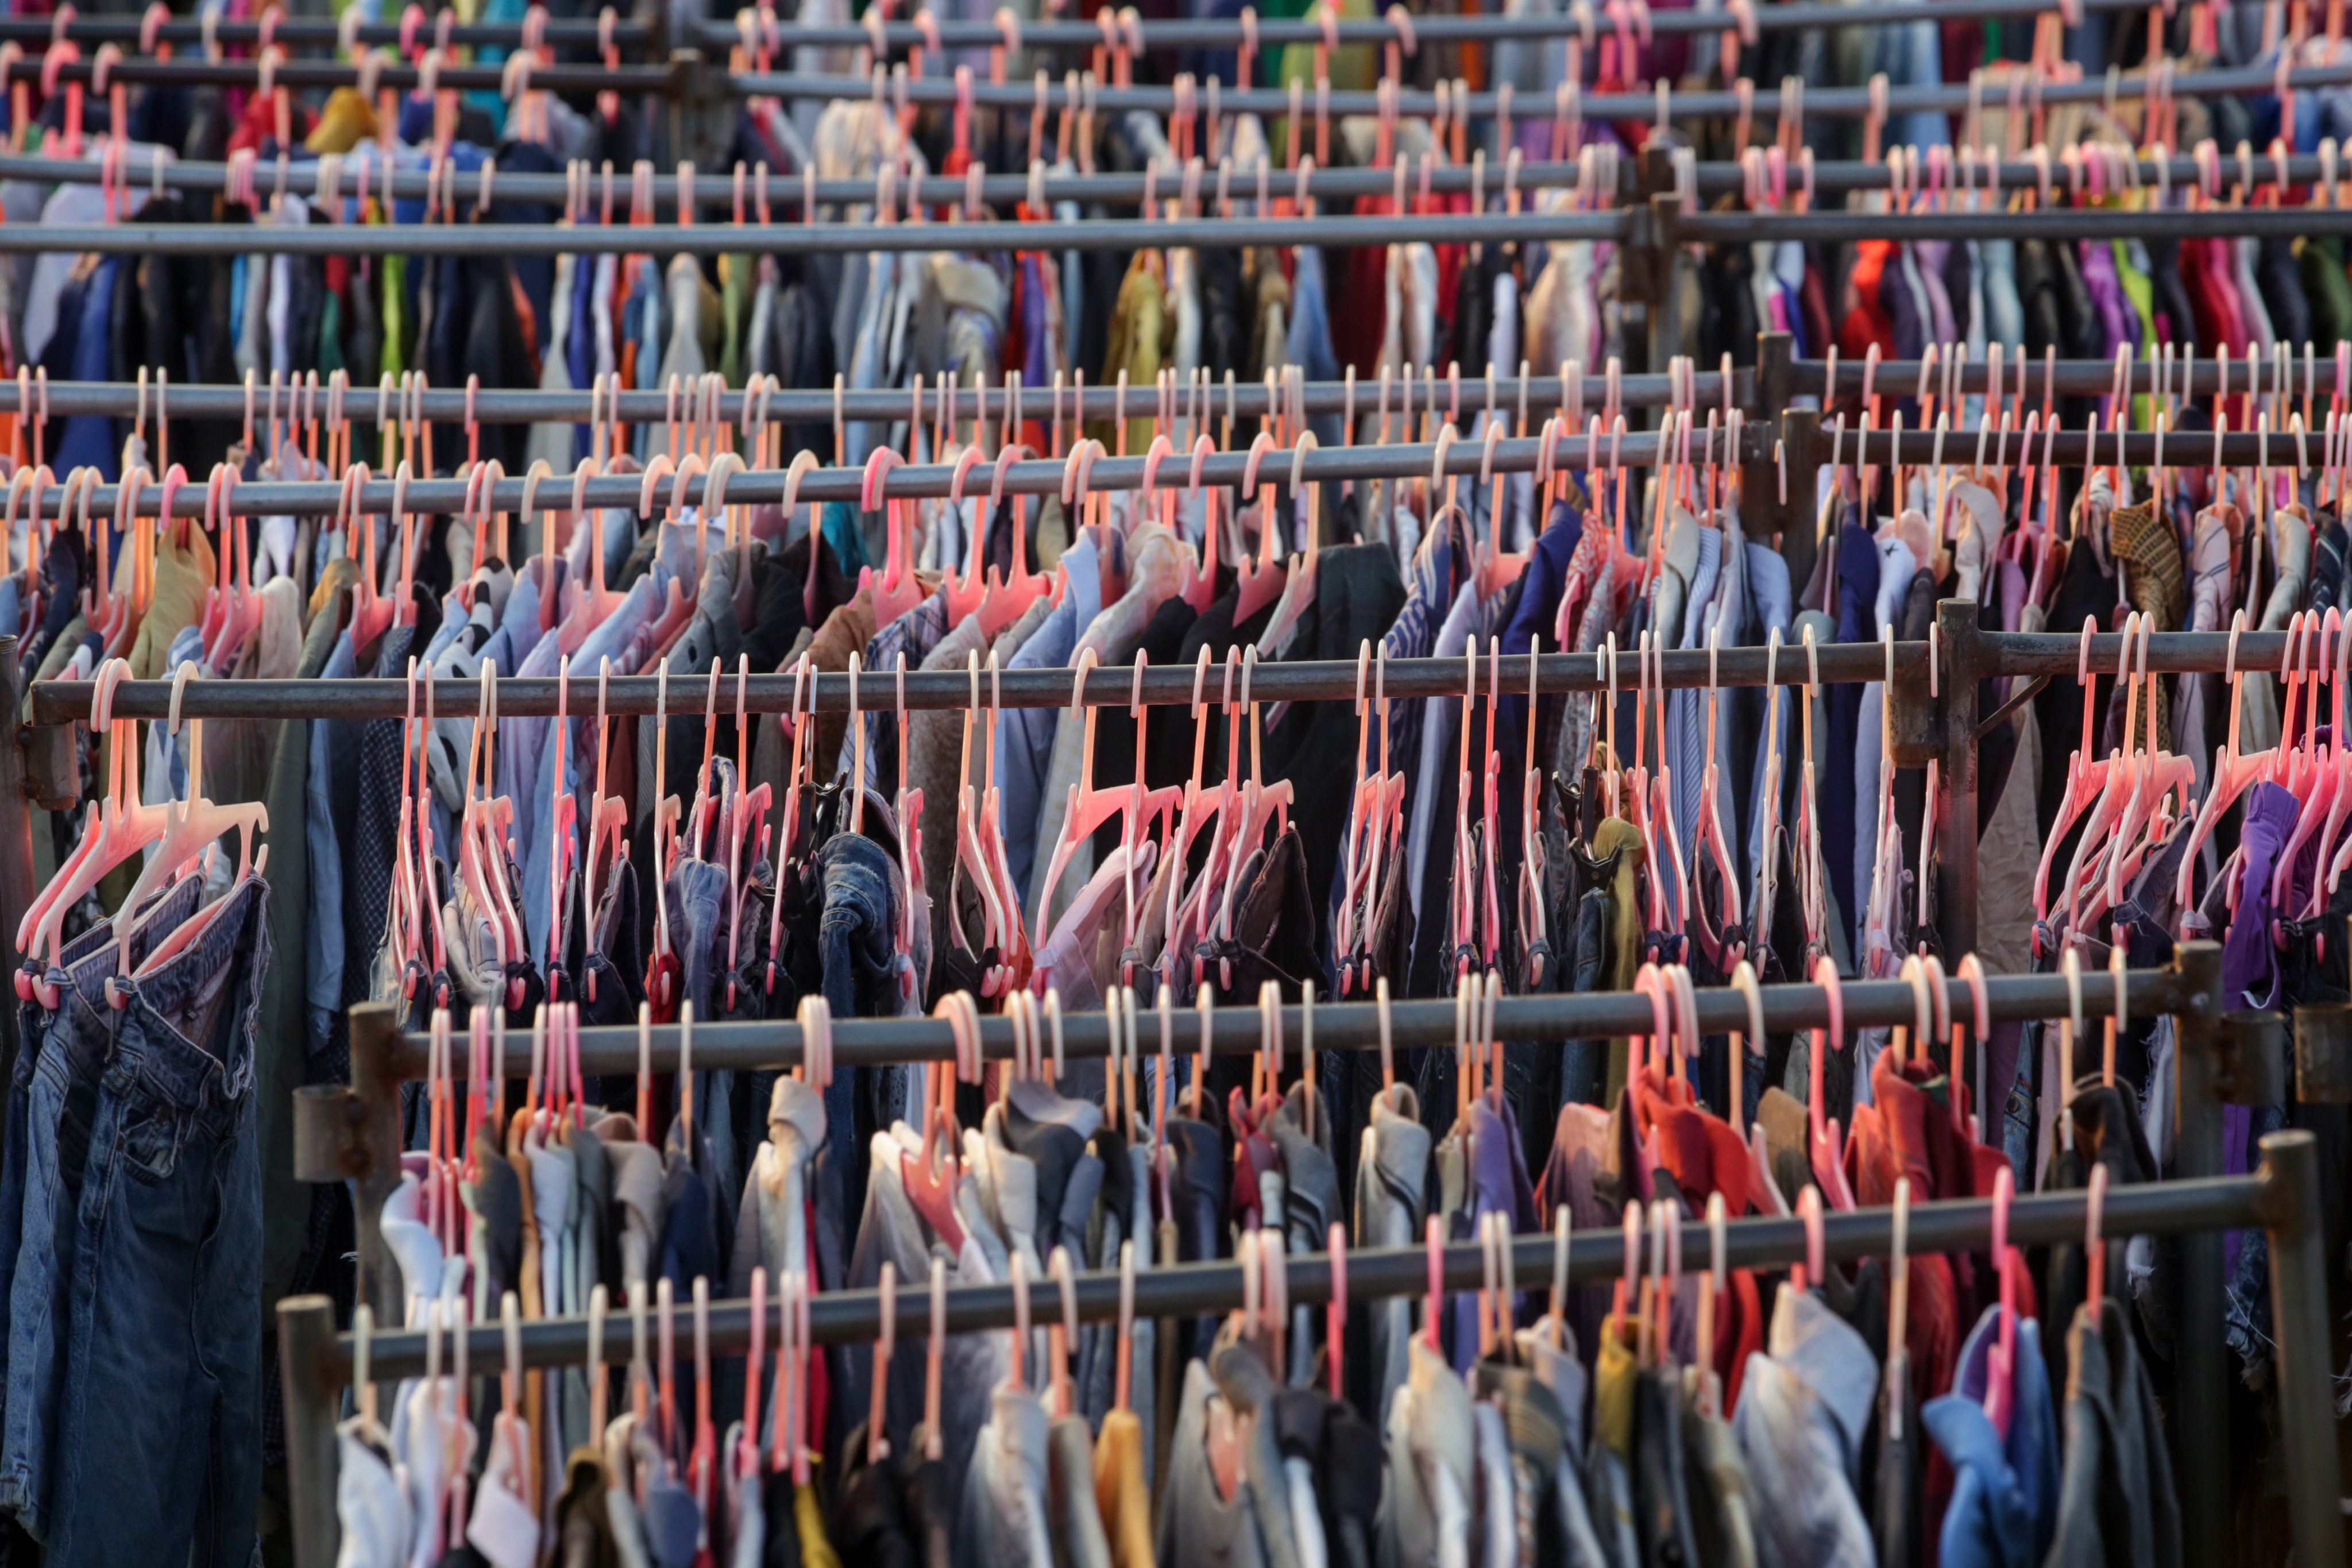 Used clothes on racks in a secondhand shop. For the last 70 years, we have measured the prosperity of countries using gross domestic product – how much the total sales of goods and services has grown, without acknowledging the social or climate impact from economic activities. Photo: Shutterstock